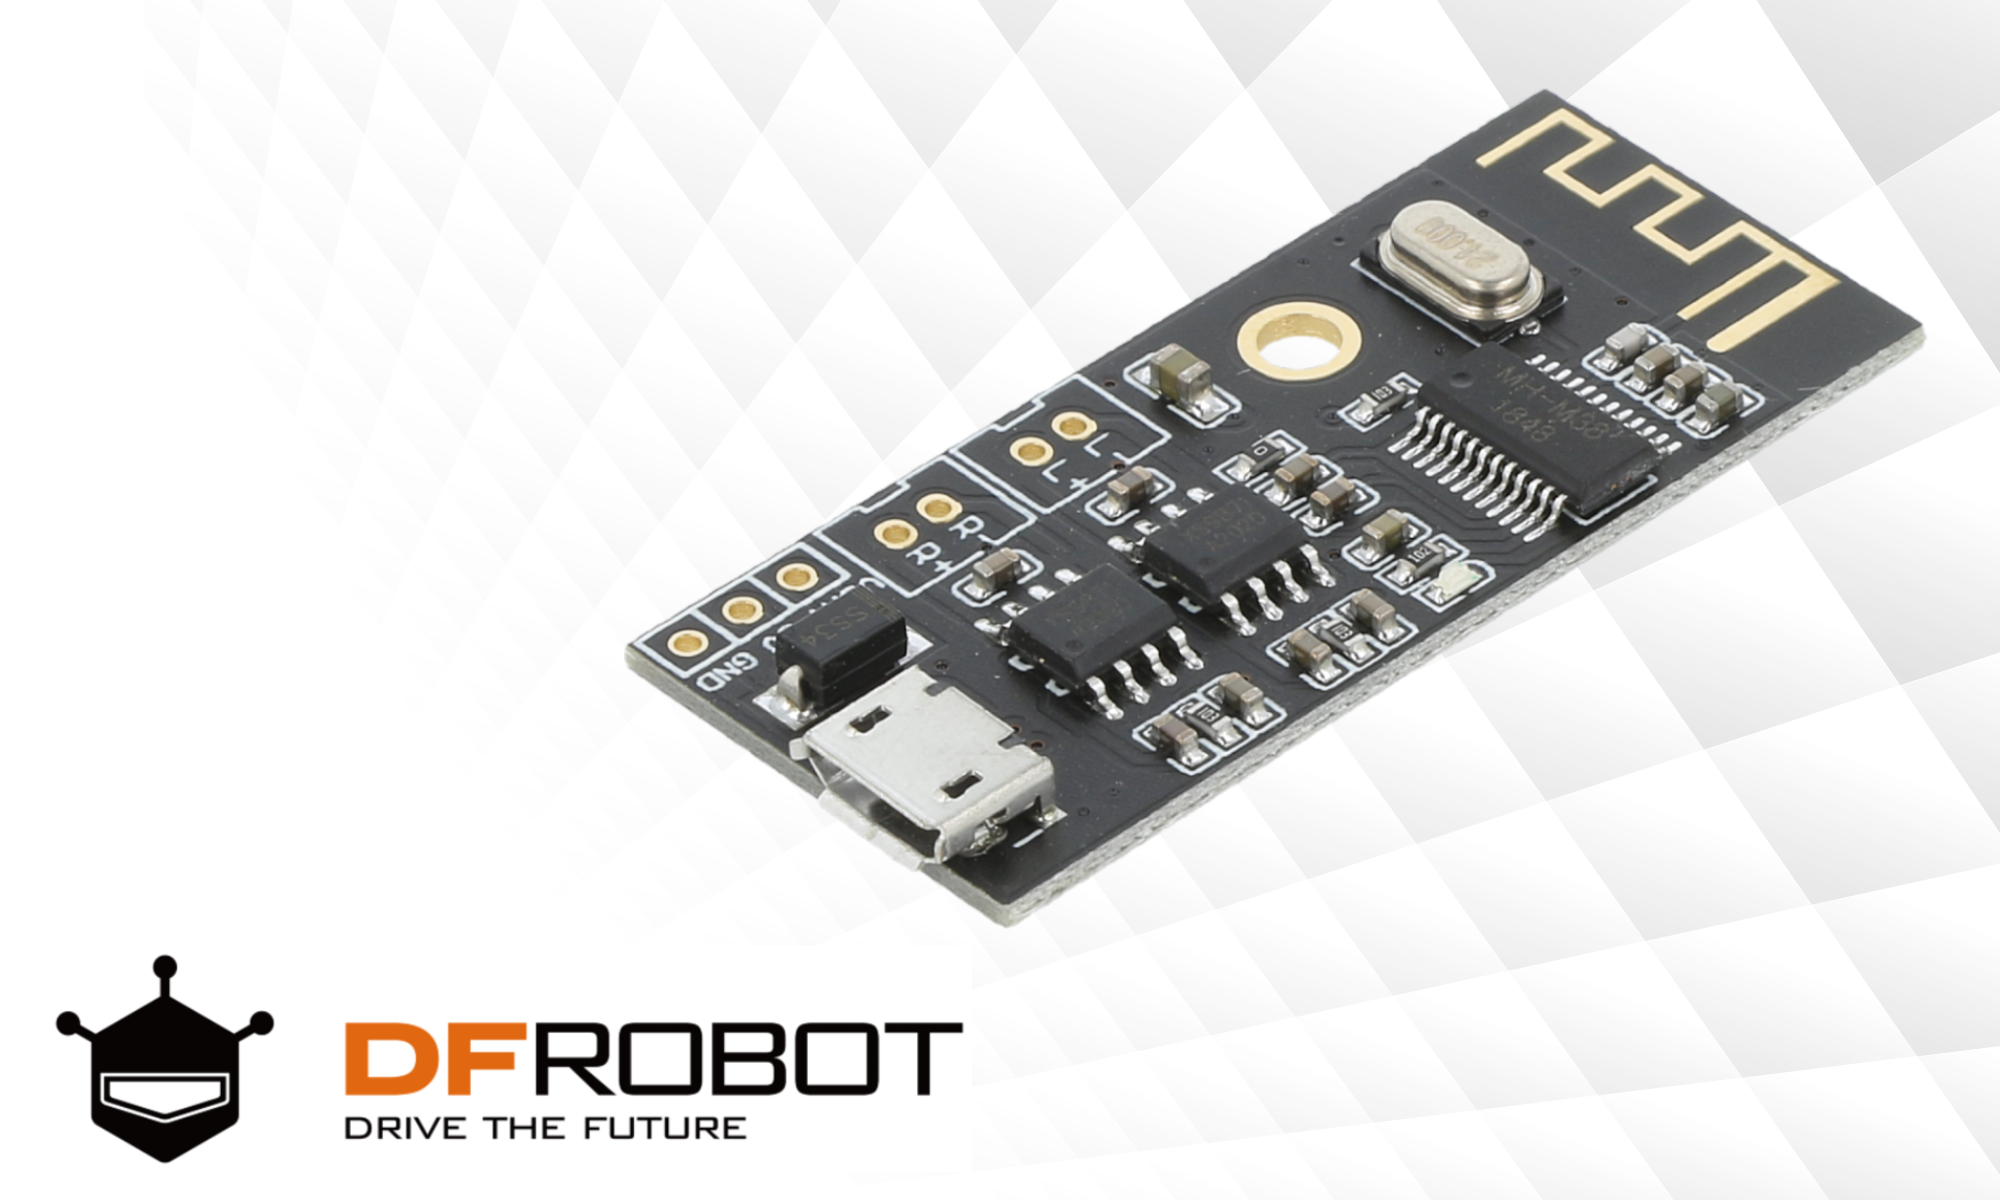 Bluetooth audio module from DFRobot